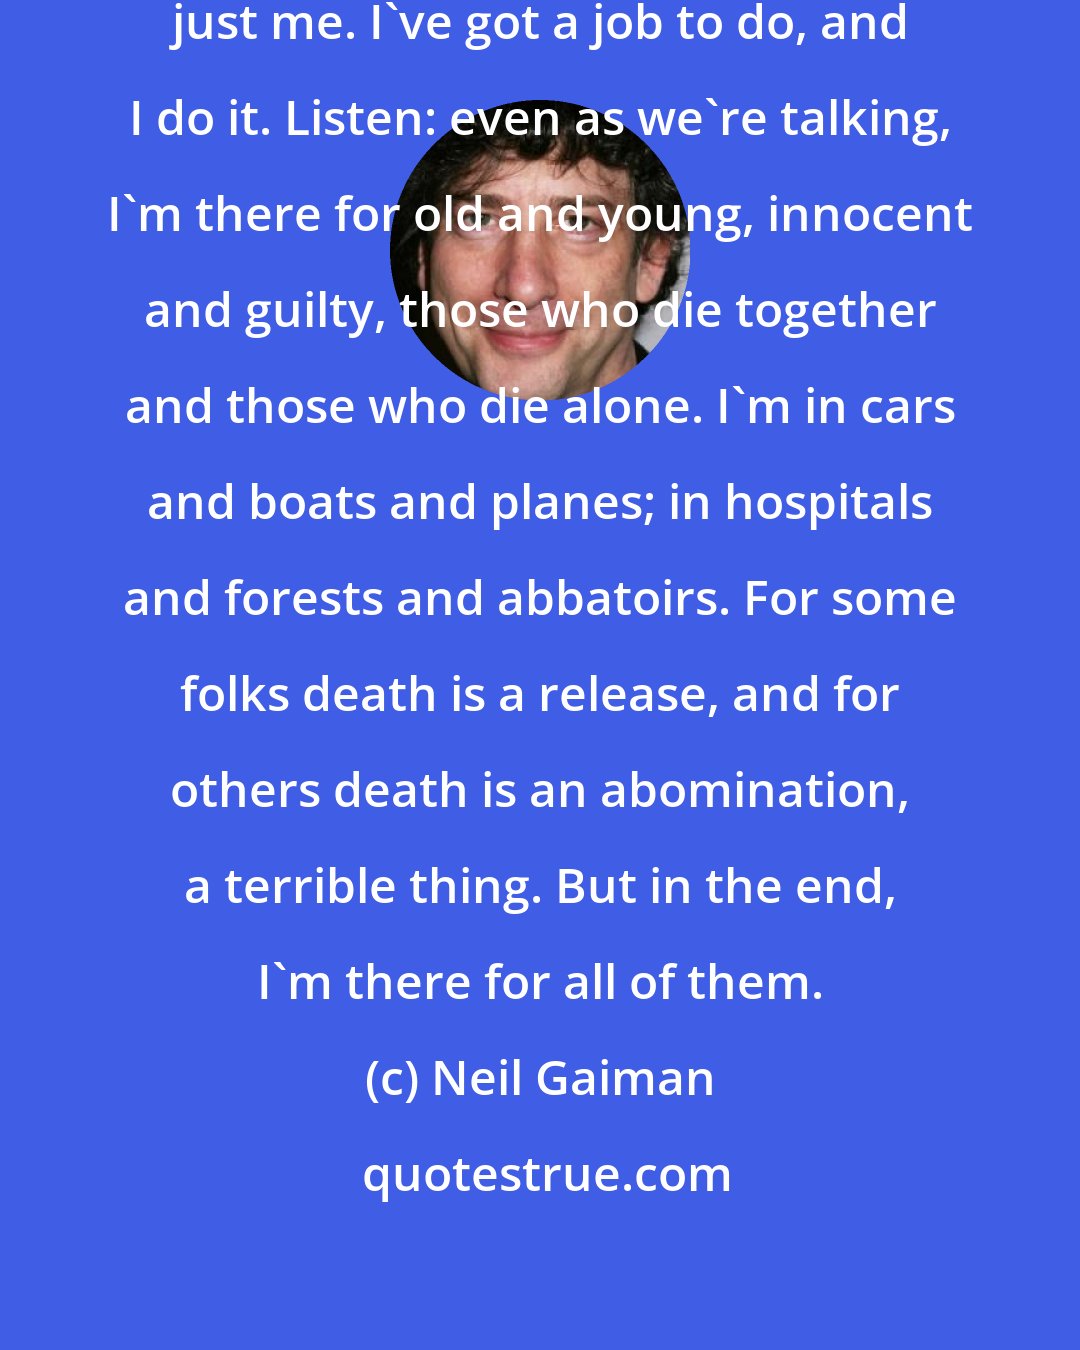 Neil Gaiman: I'm not blessed, or merciful. I'm just me. I've got a job to do, and I do it. Listen: even as we're talking, I'm there for old and young, innocent and guilty, those who die together and those who die alone. I'm in cars and boats and planes; in hospitals and forests and abbatoirs. For some folks death is a release, and for others death is an abomination, a terrible thing. But in the end, I'm there for all of them.